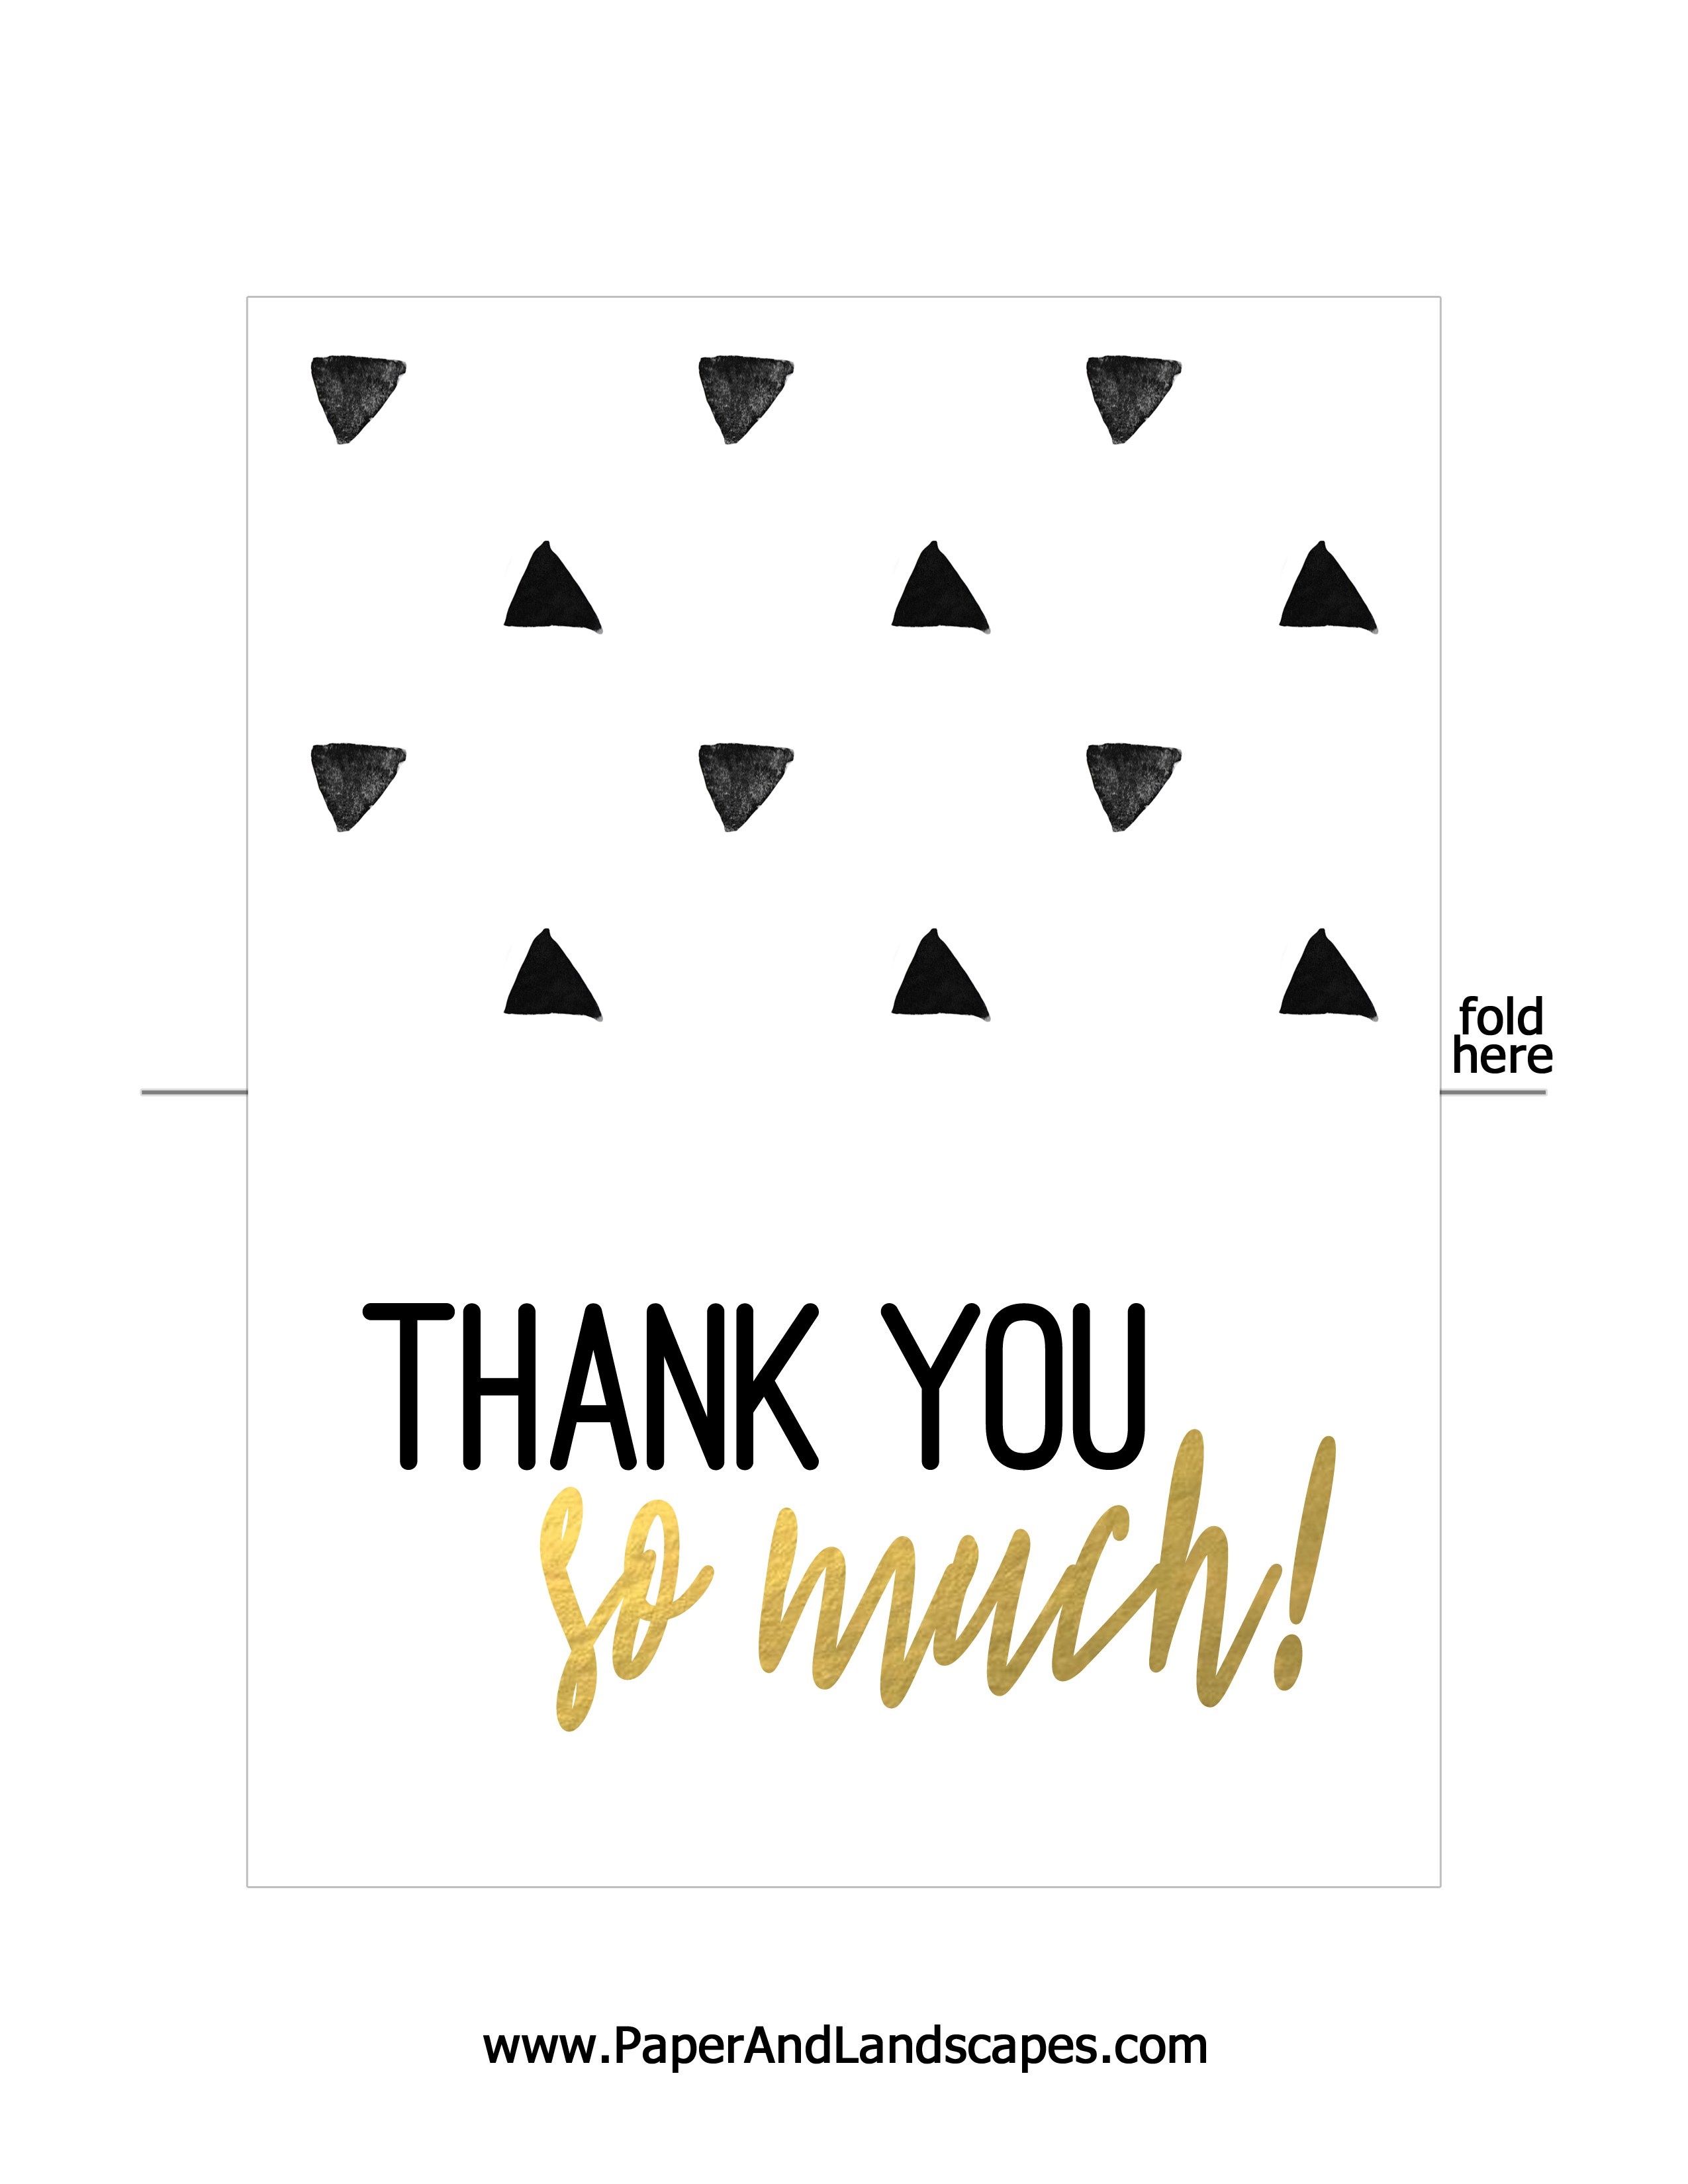 Free Printable Thank You Cards - Paper And Landscapes - Free Printable Thank You Cards